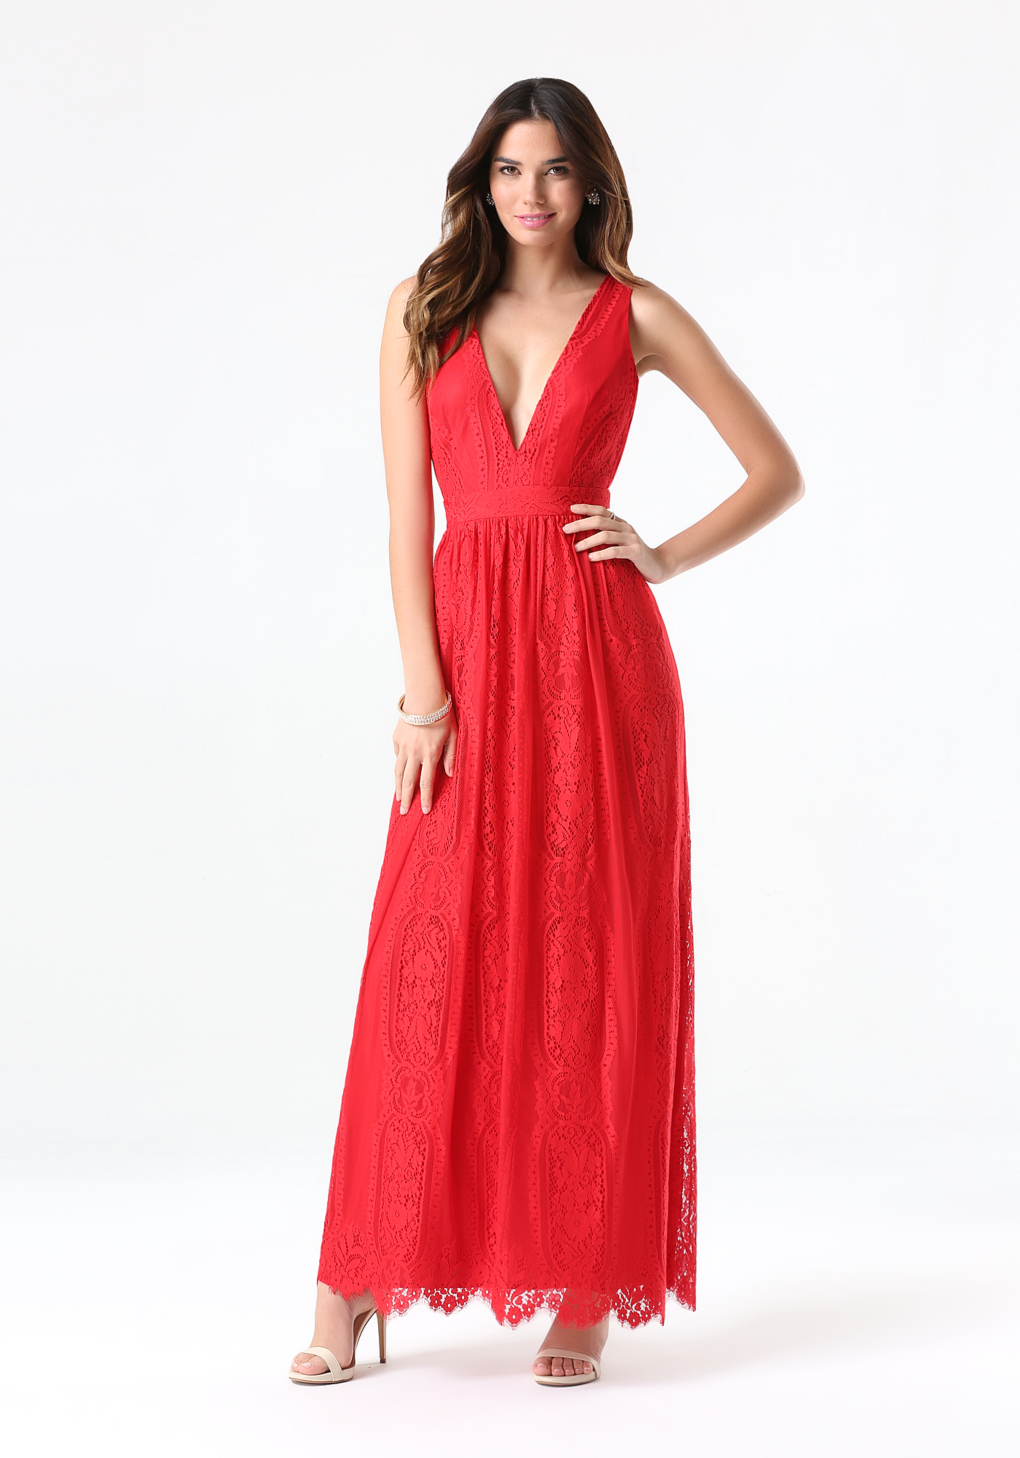 Lyst - Bebe Lace Plunge Neck Maxi Dress in Red